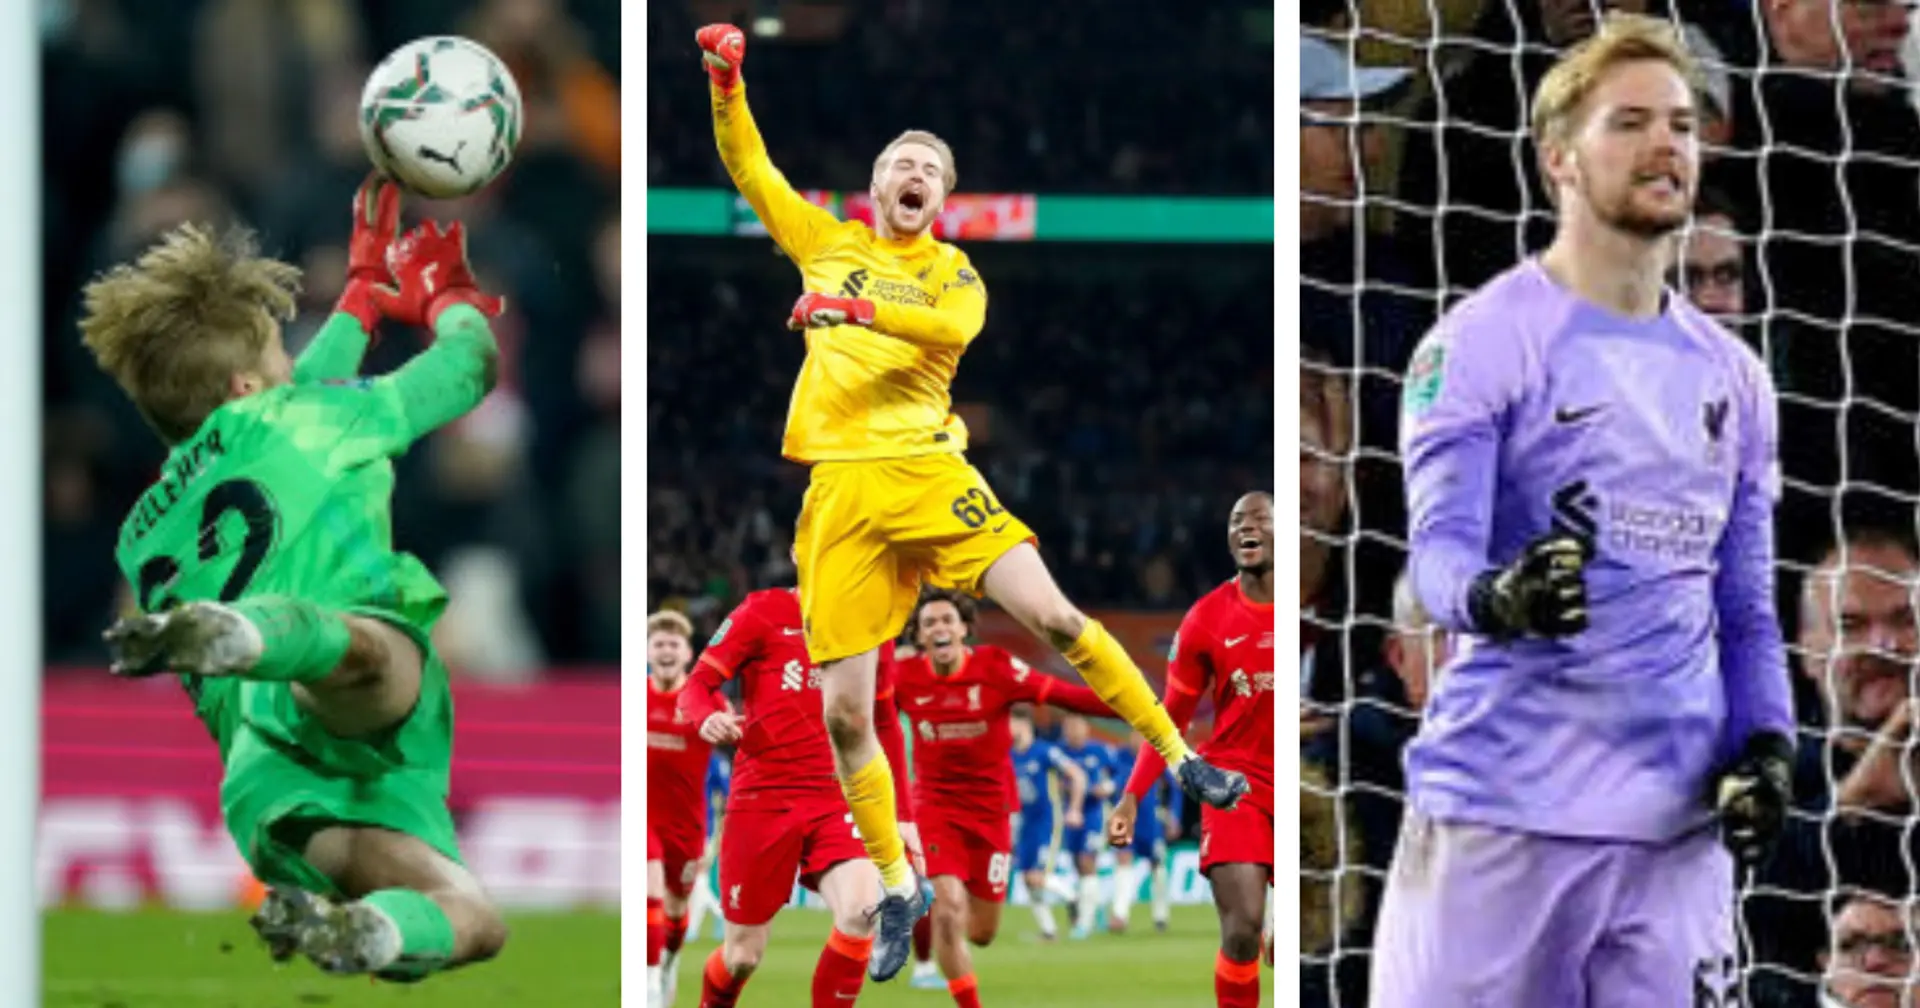 Arsenal, Leicester, Chelsea, and now Derby: breaking down Caoimhin Kelleher's penalty shoot-out record